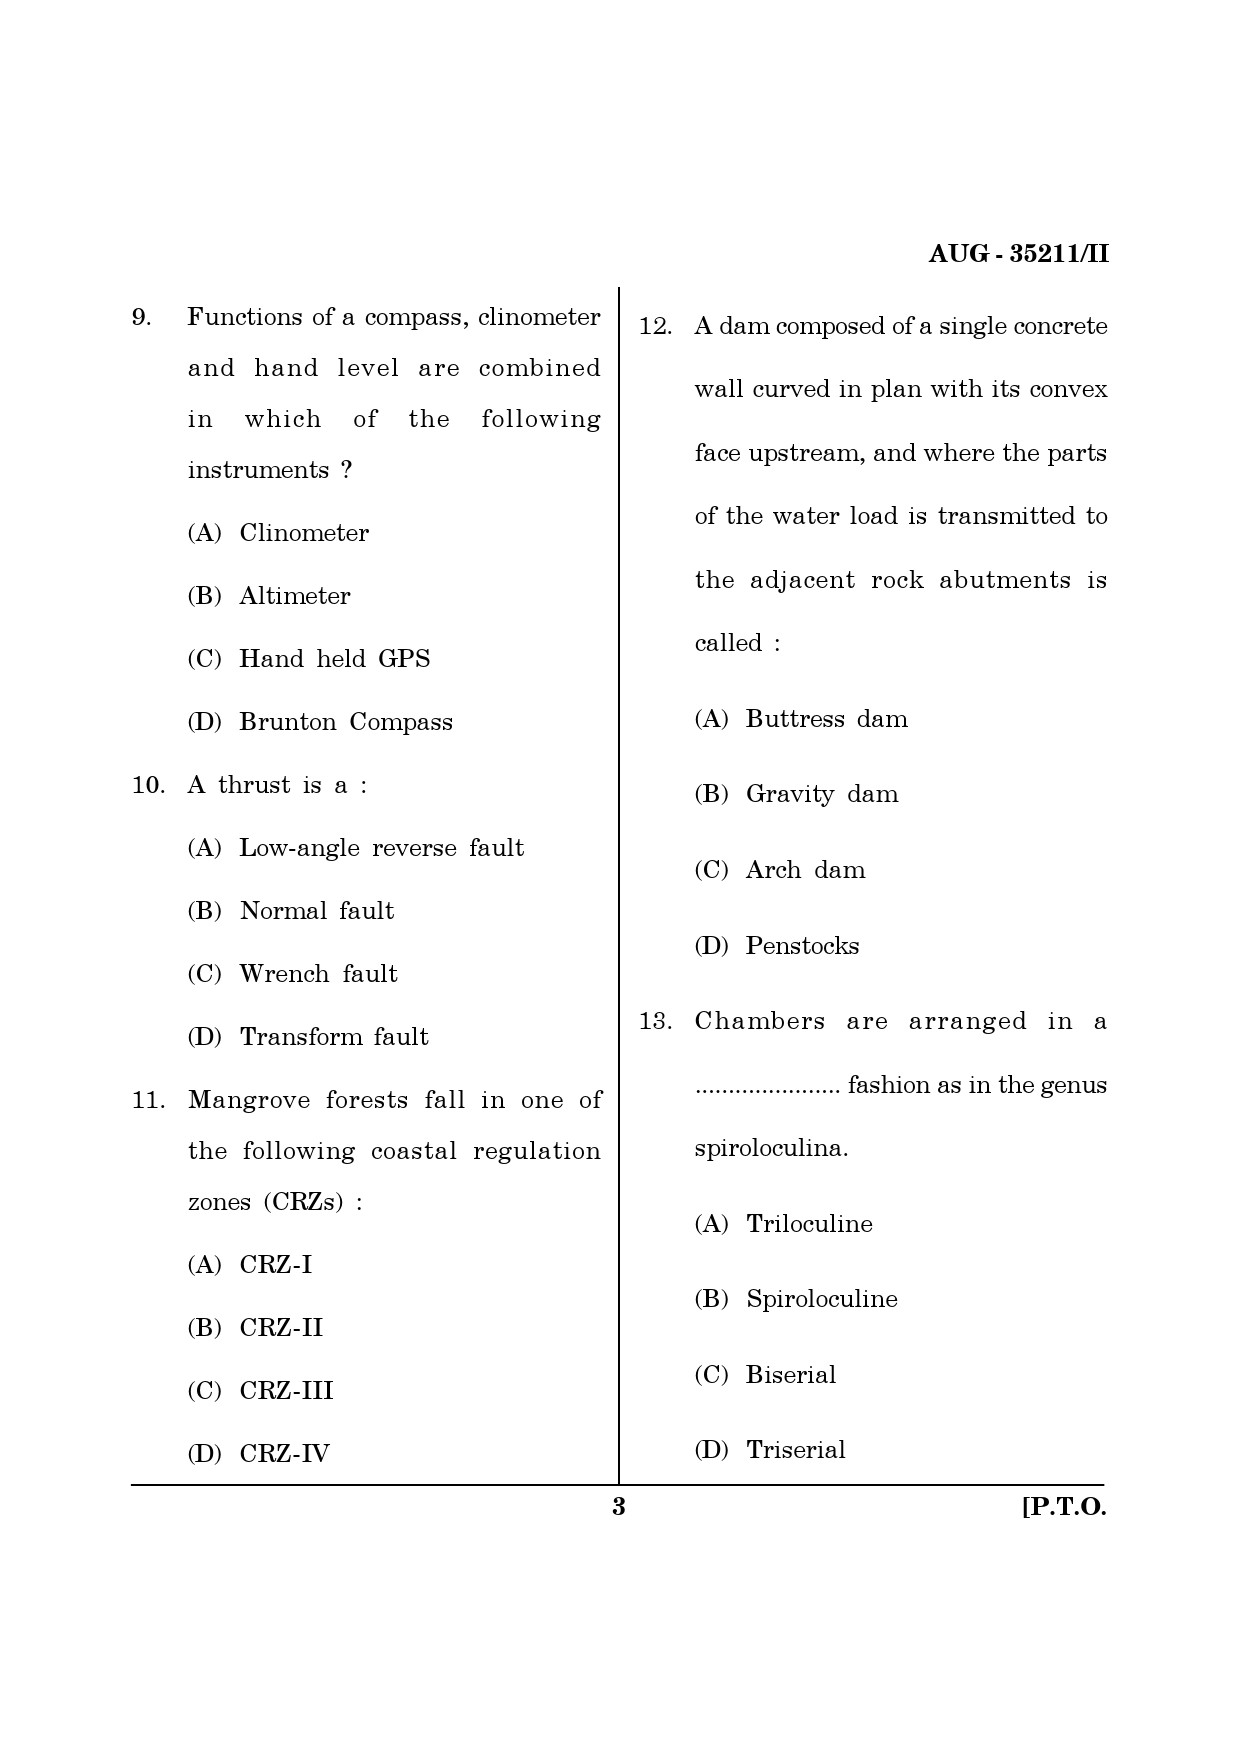 Maharashtra SET Earth Atmospheric Ocean Planetary Science Question Paper II August 2011 3